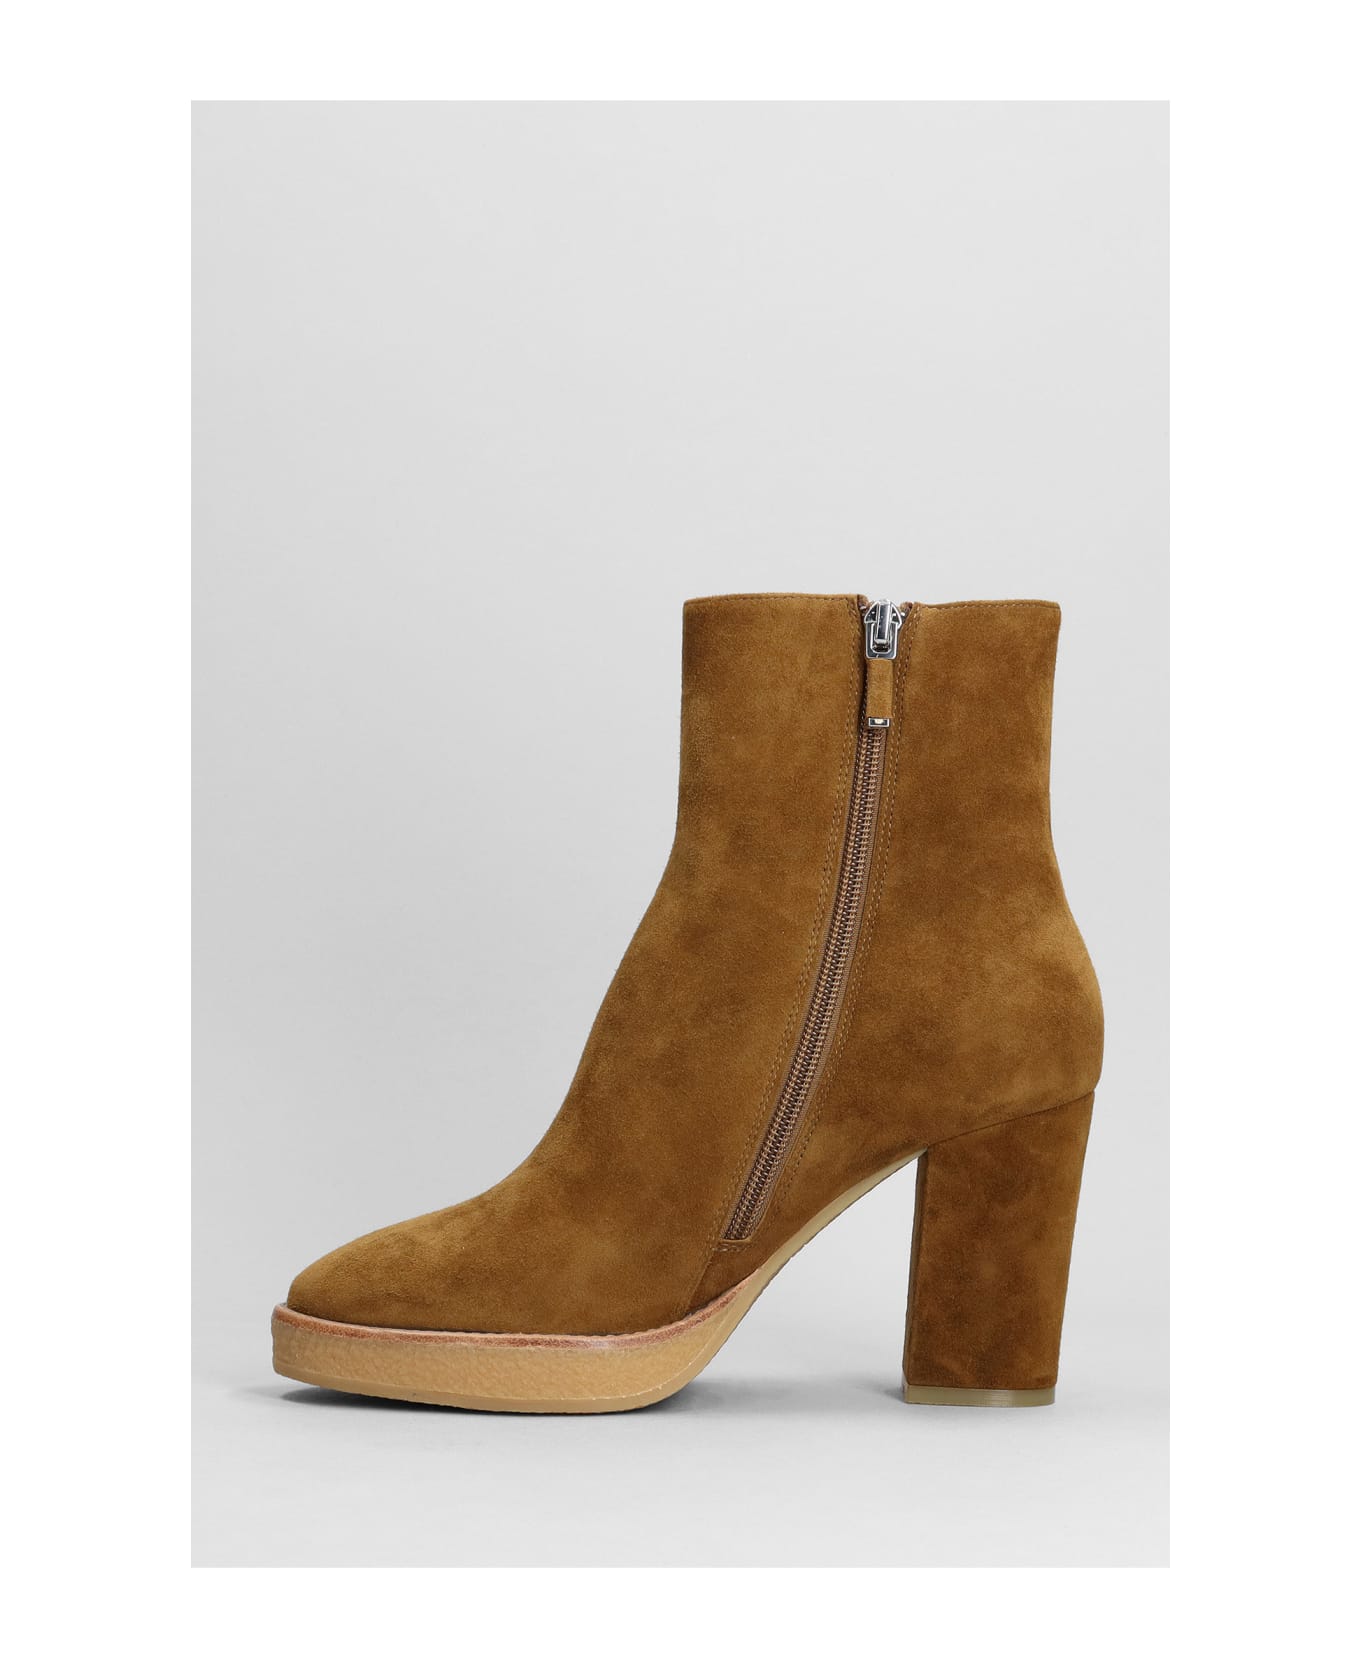 Lola Cruz High Heels Ankle Boots In Leather Color Suede - leather color